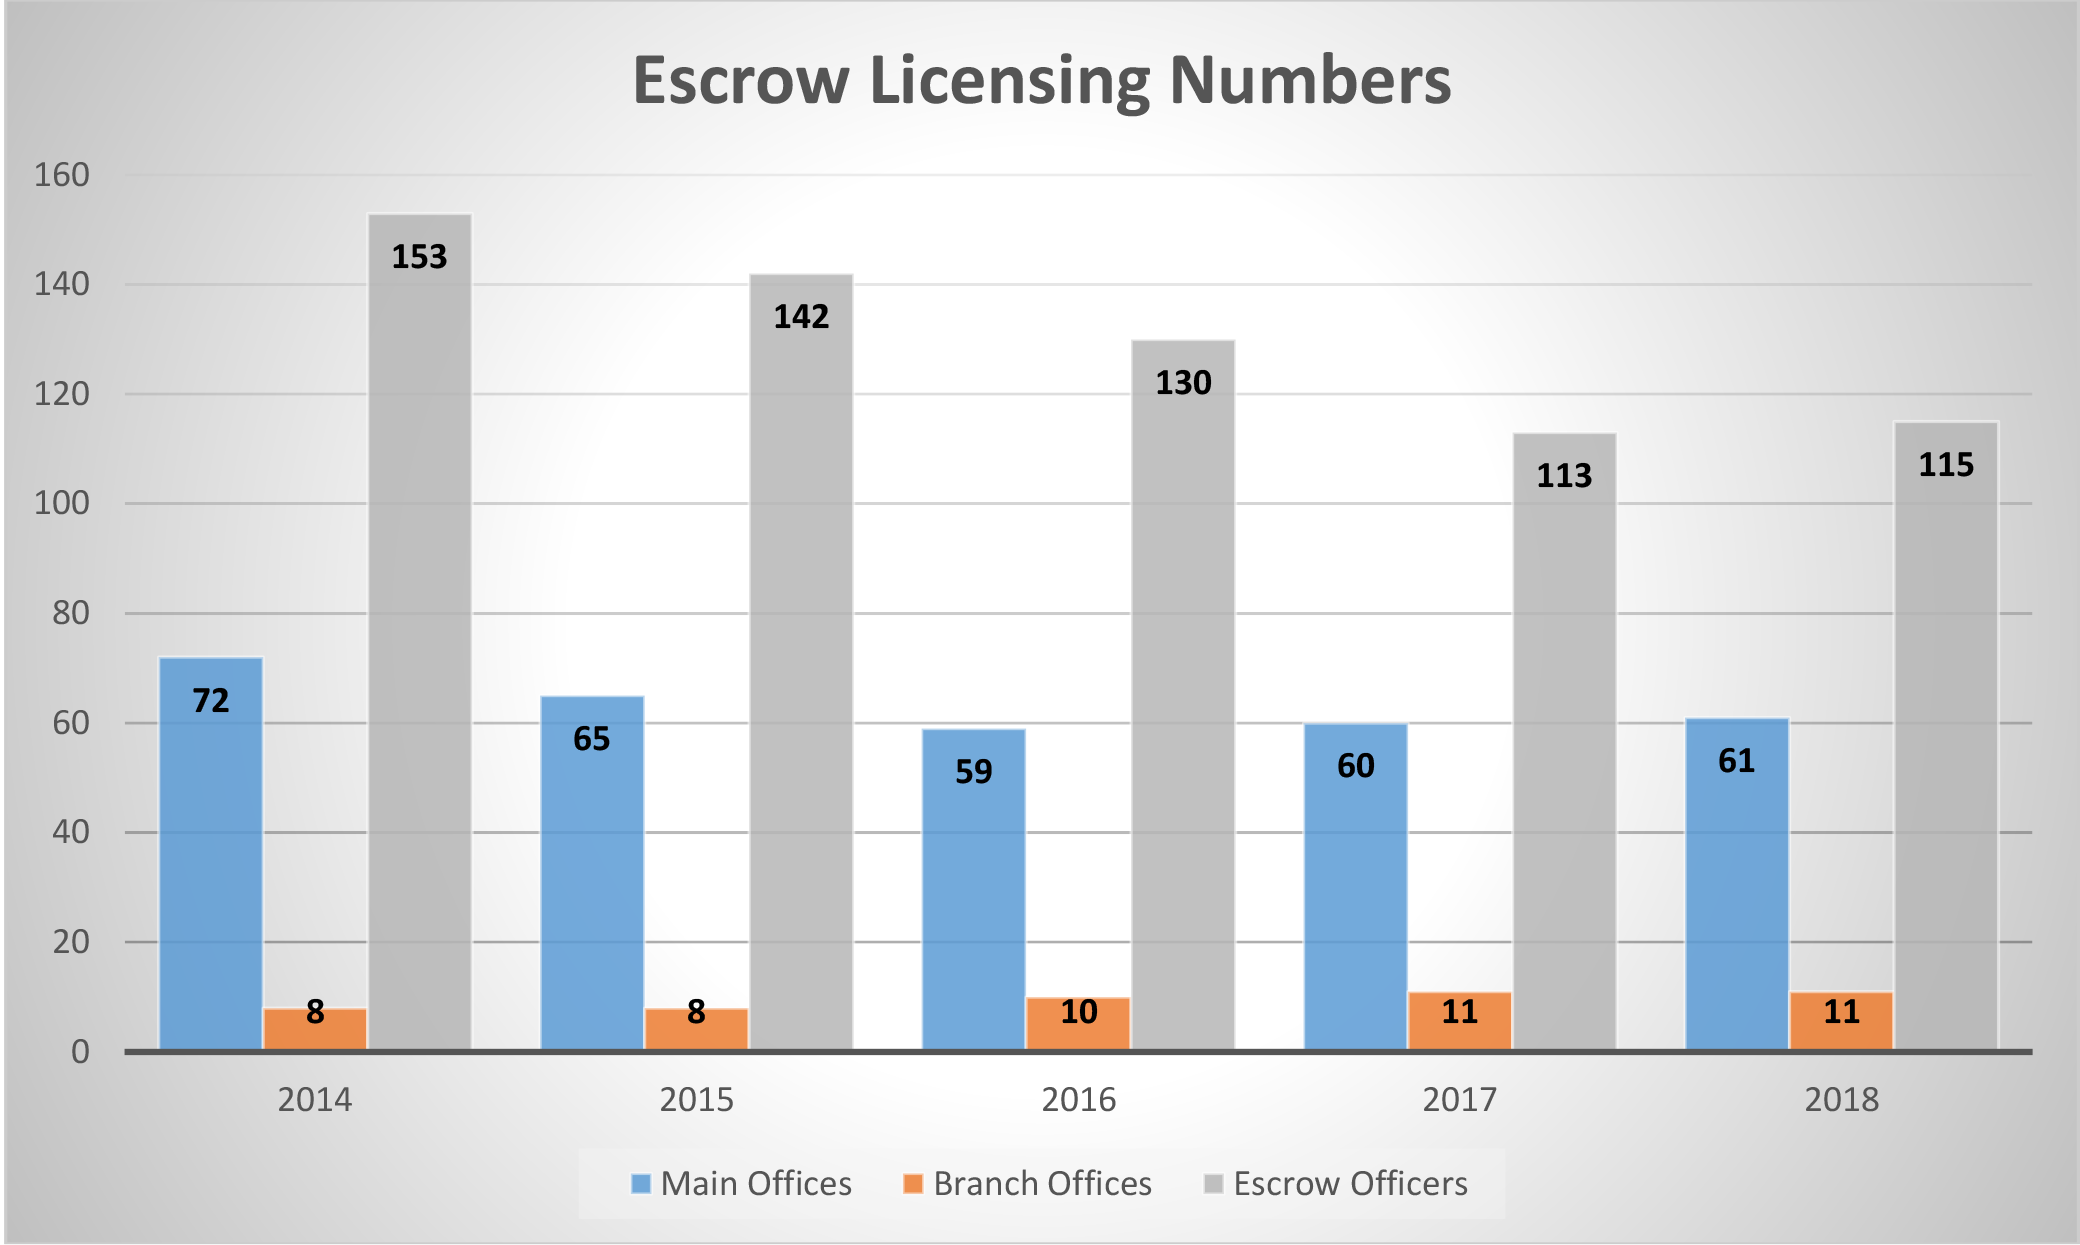 Escrow Licensing Numbers